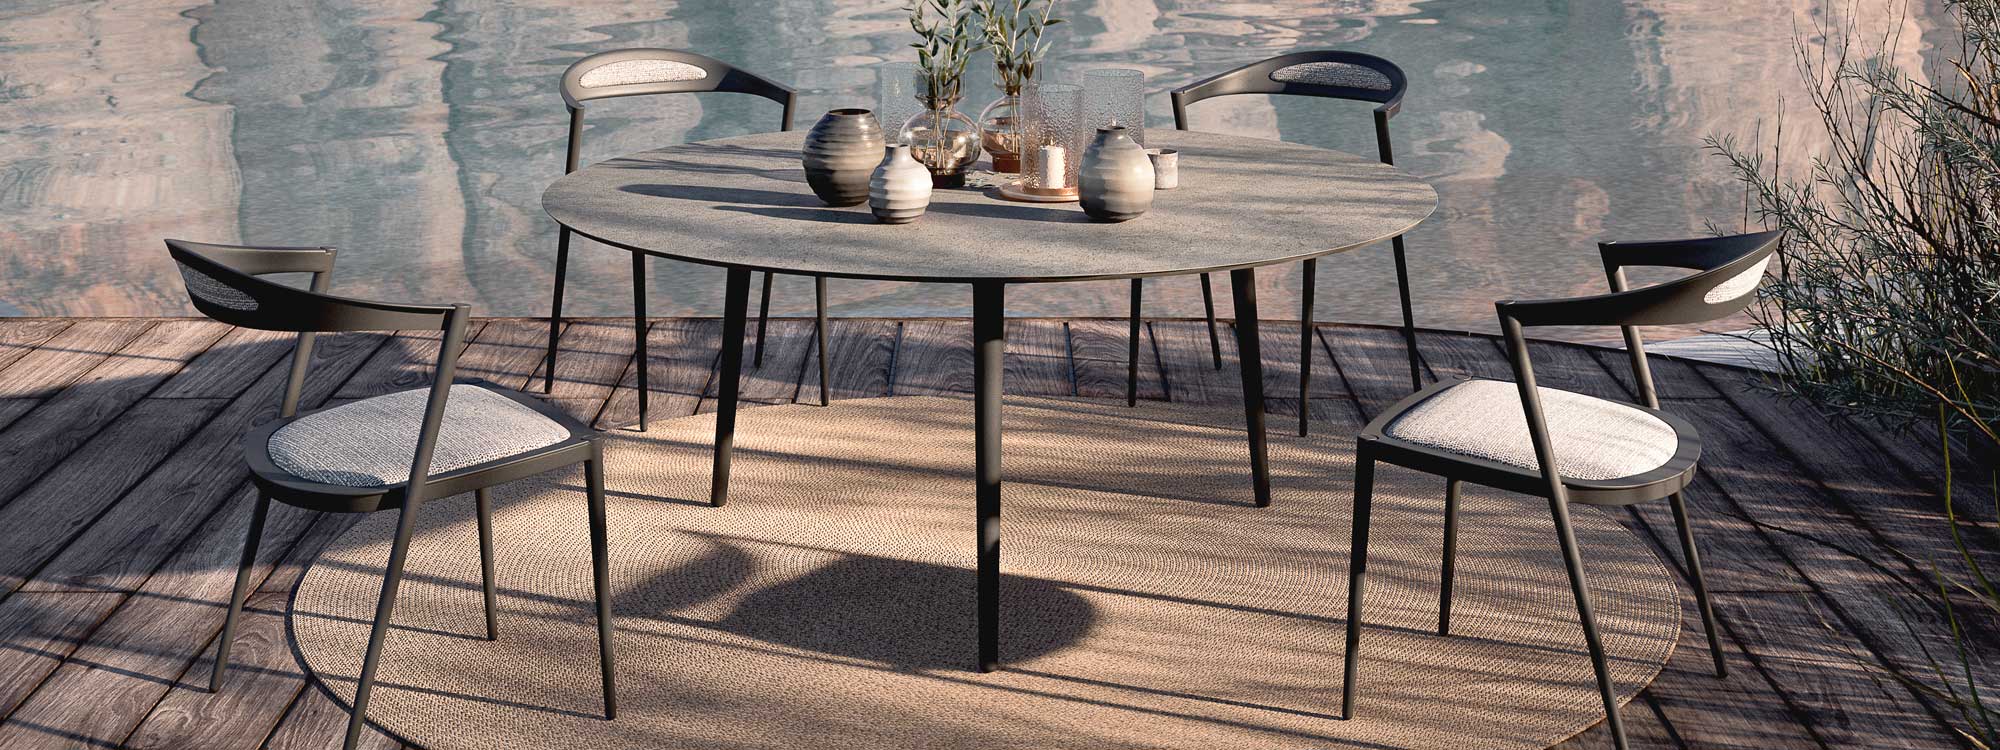 Image of circular Styletto garden table & chairs by Royal Botania